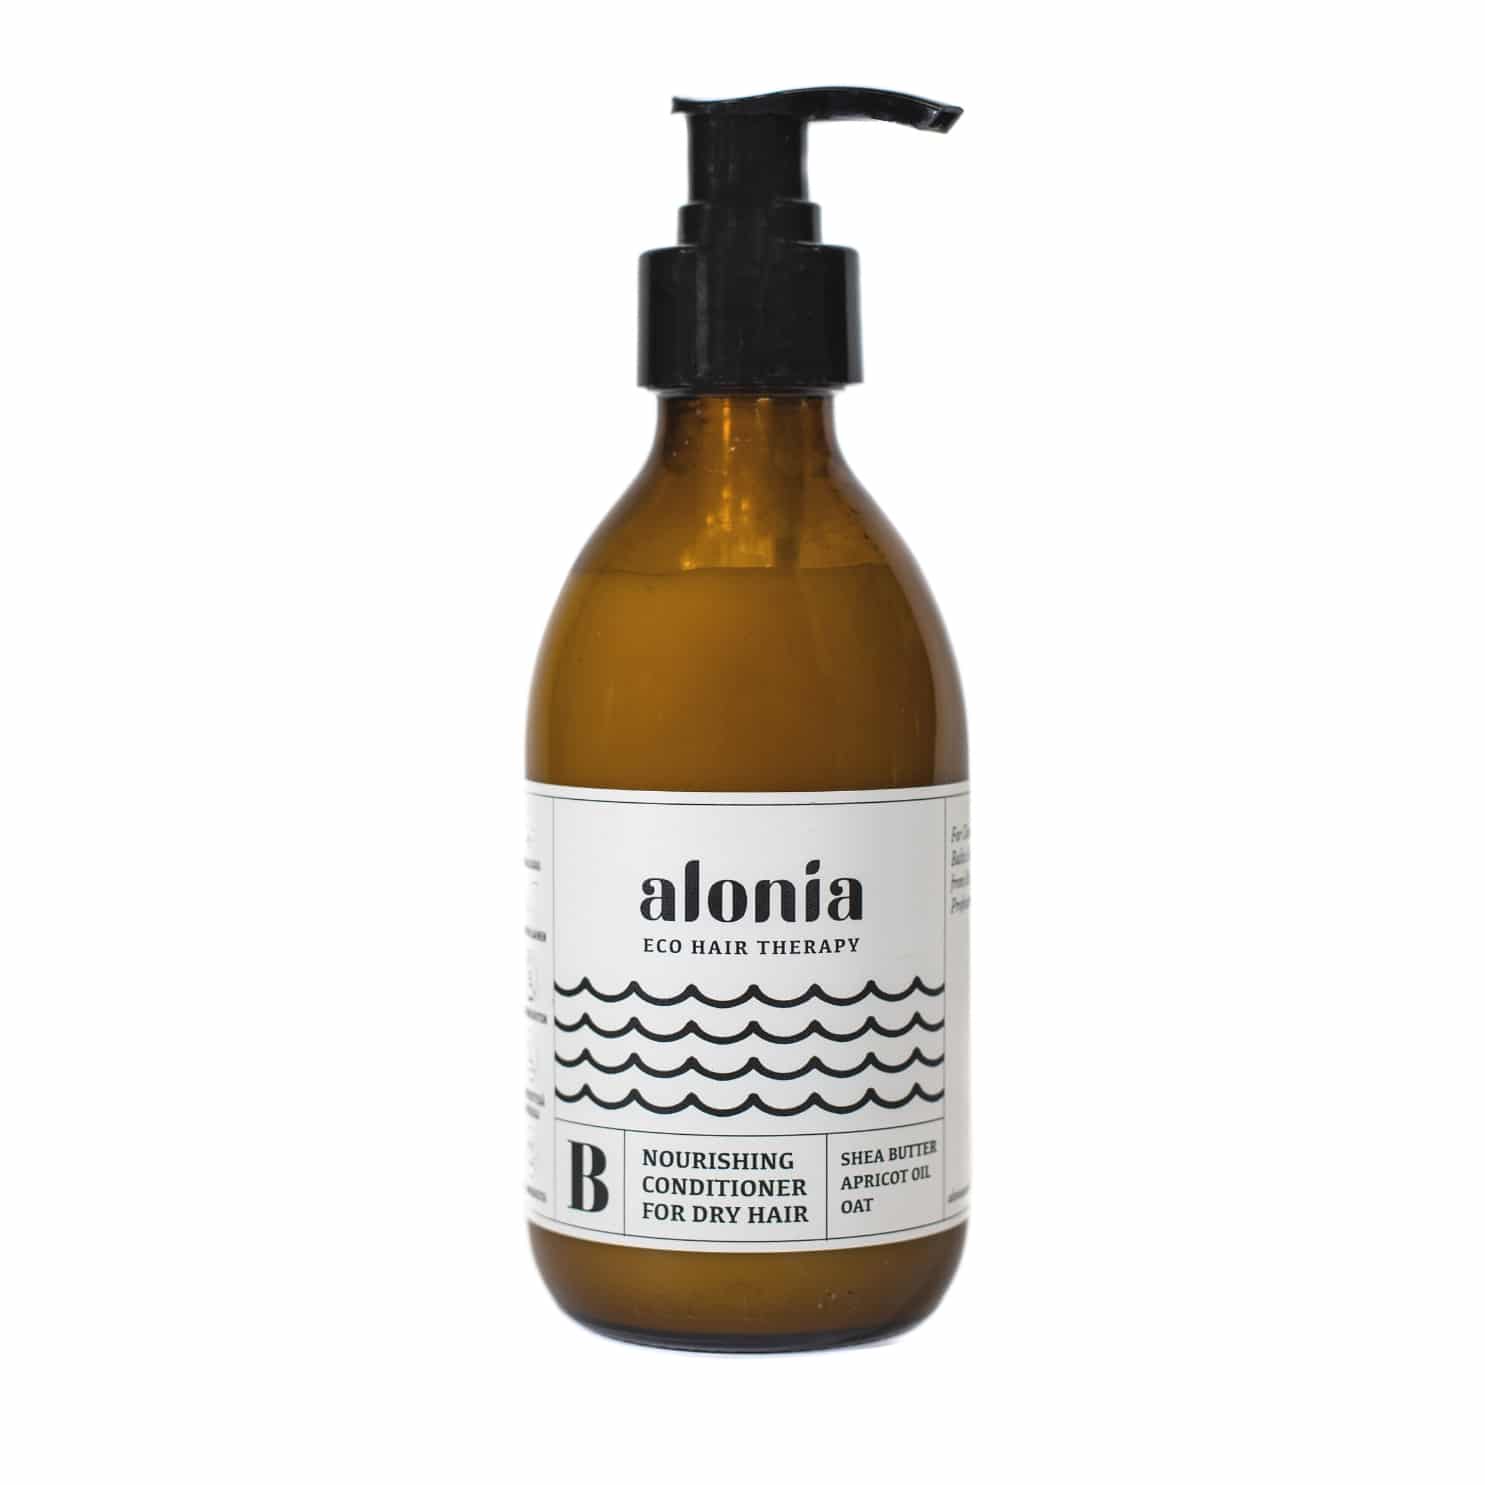 Alonia-Eco-Hair-Therapy-B-Nourishing-Conditioner